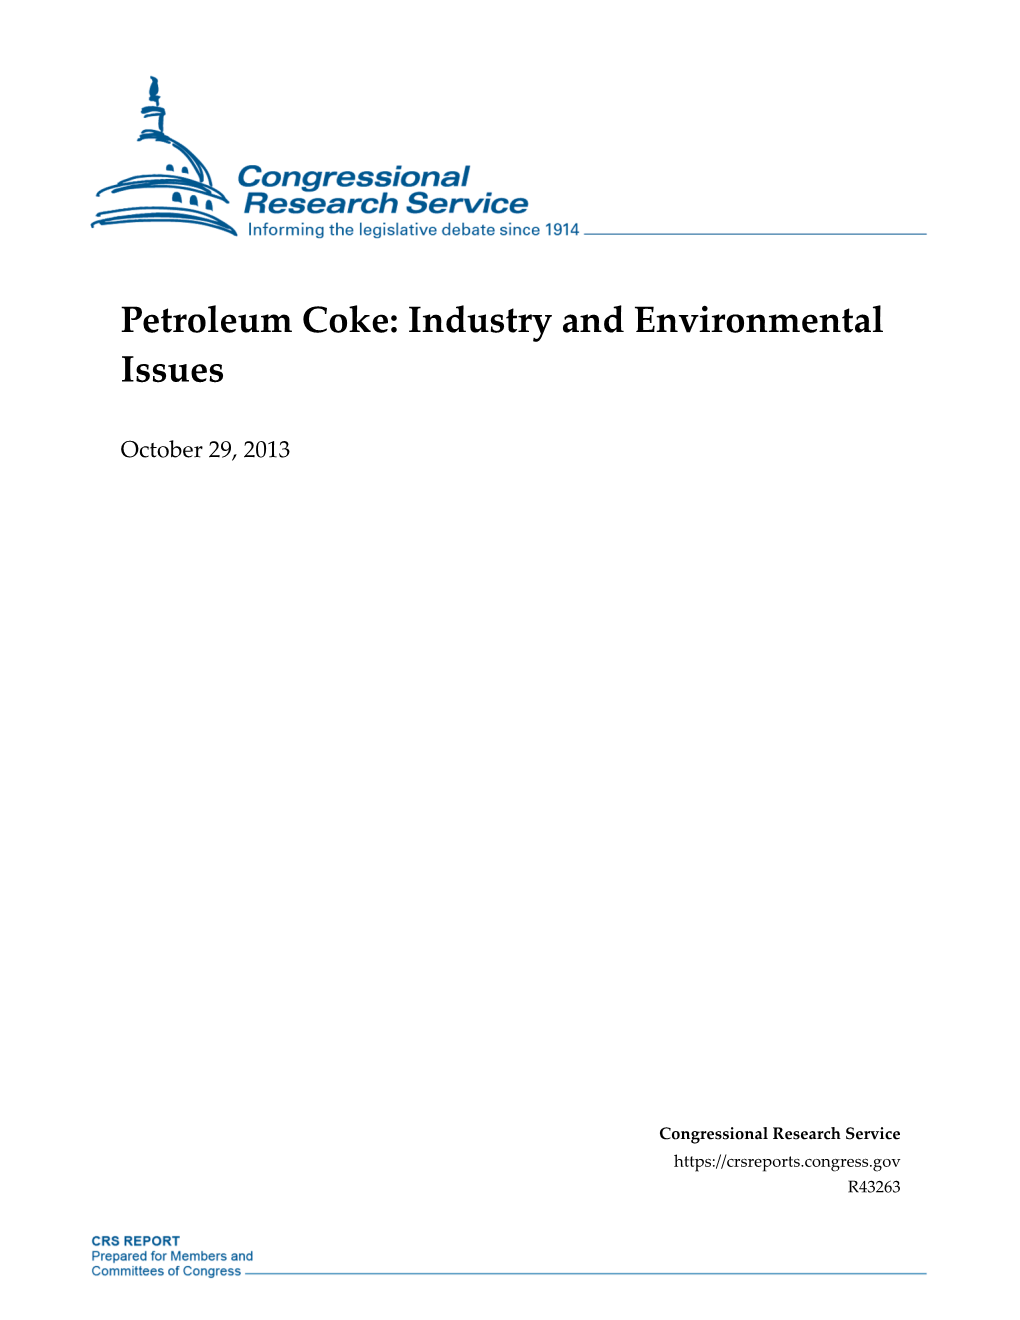 Petroleum Coke: Industry and Environmental Issues